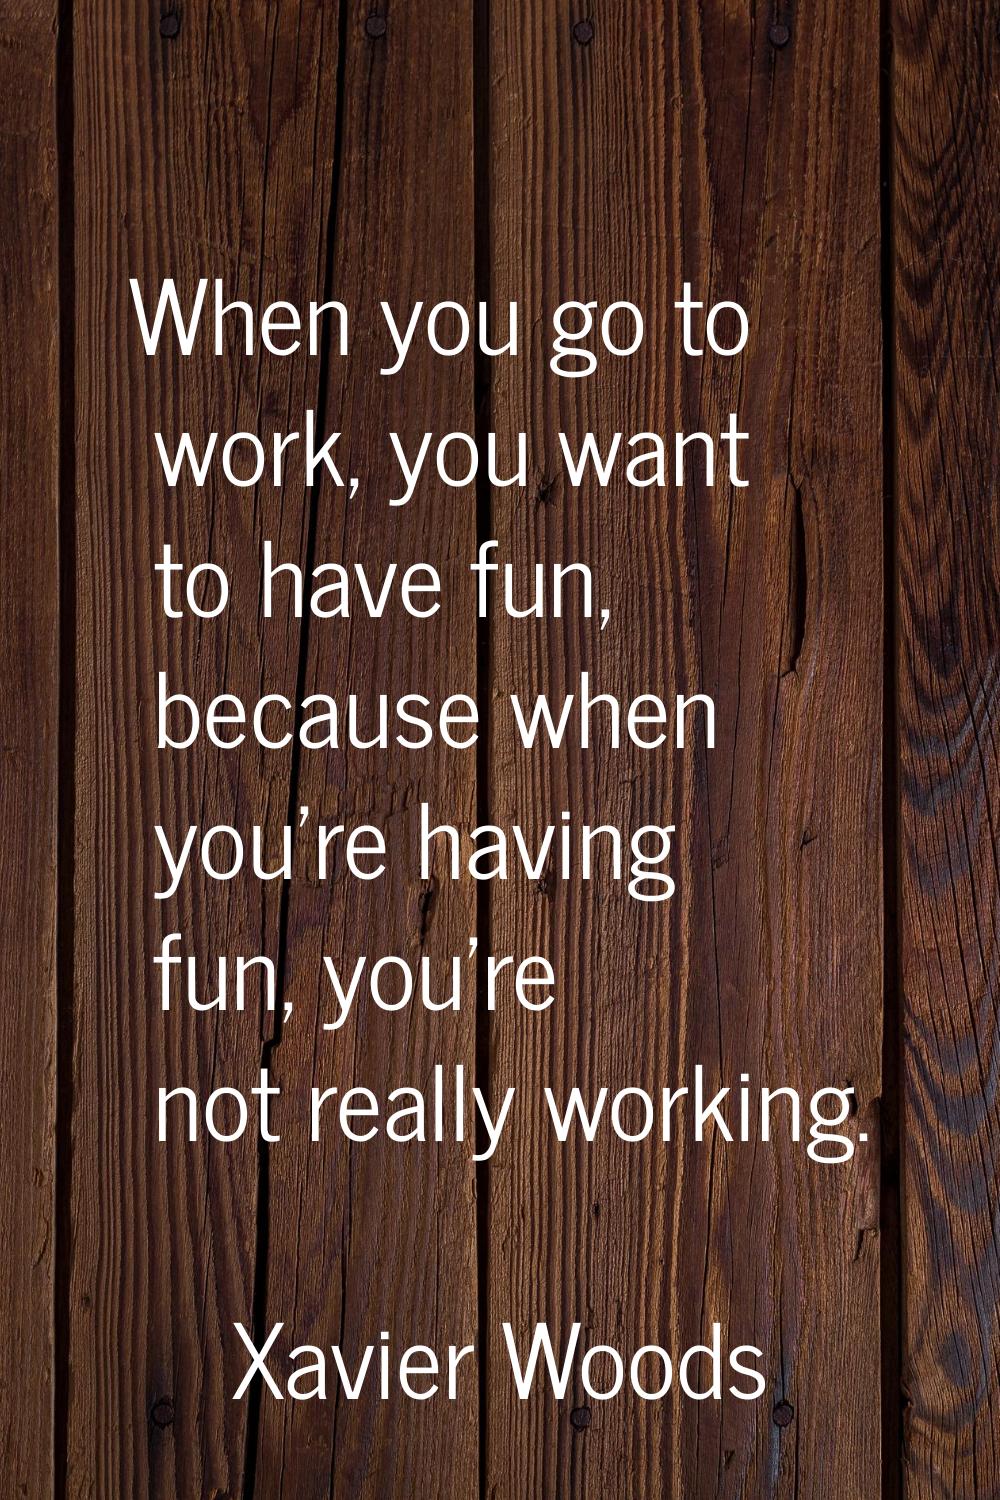 When you go to work, you want to have fun, because when you're having fun, you're not really workin